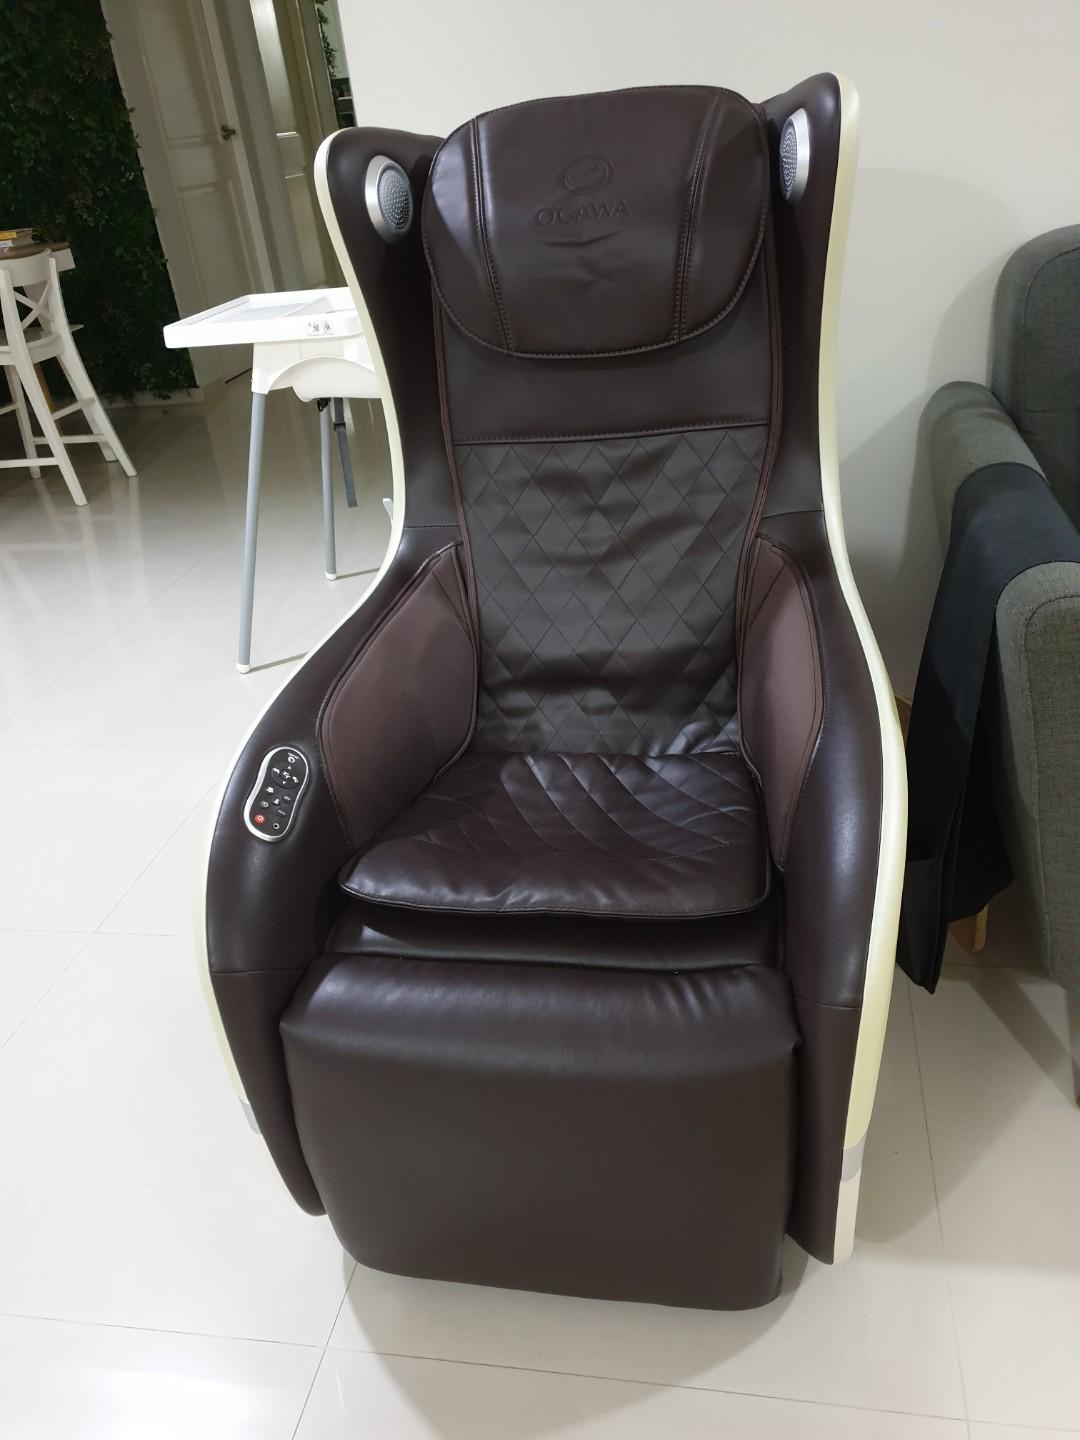 Ogawa Mysofa Massage Chair Furniture Tables Chairs On Carousell